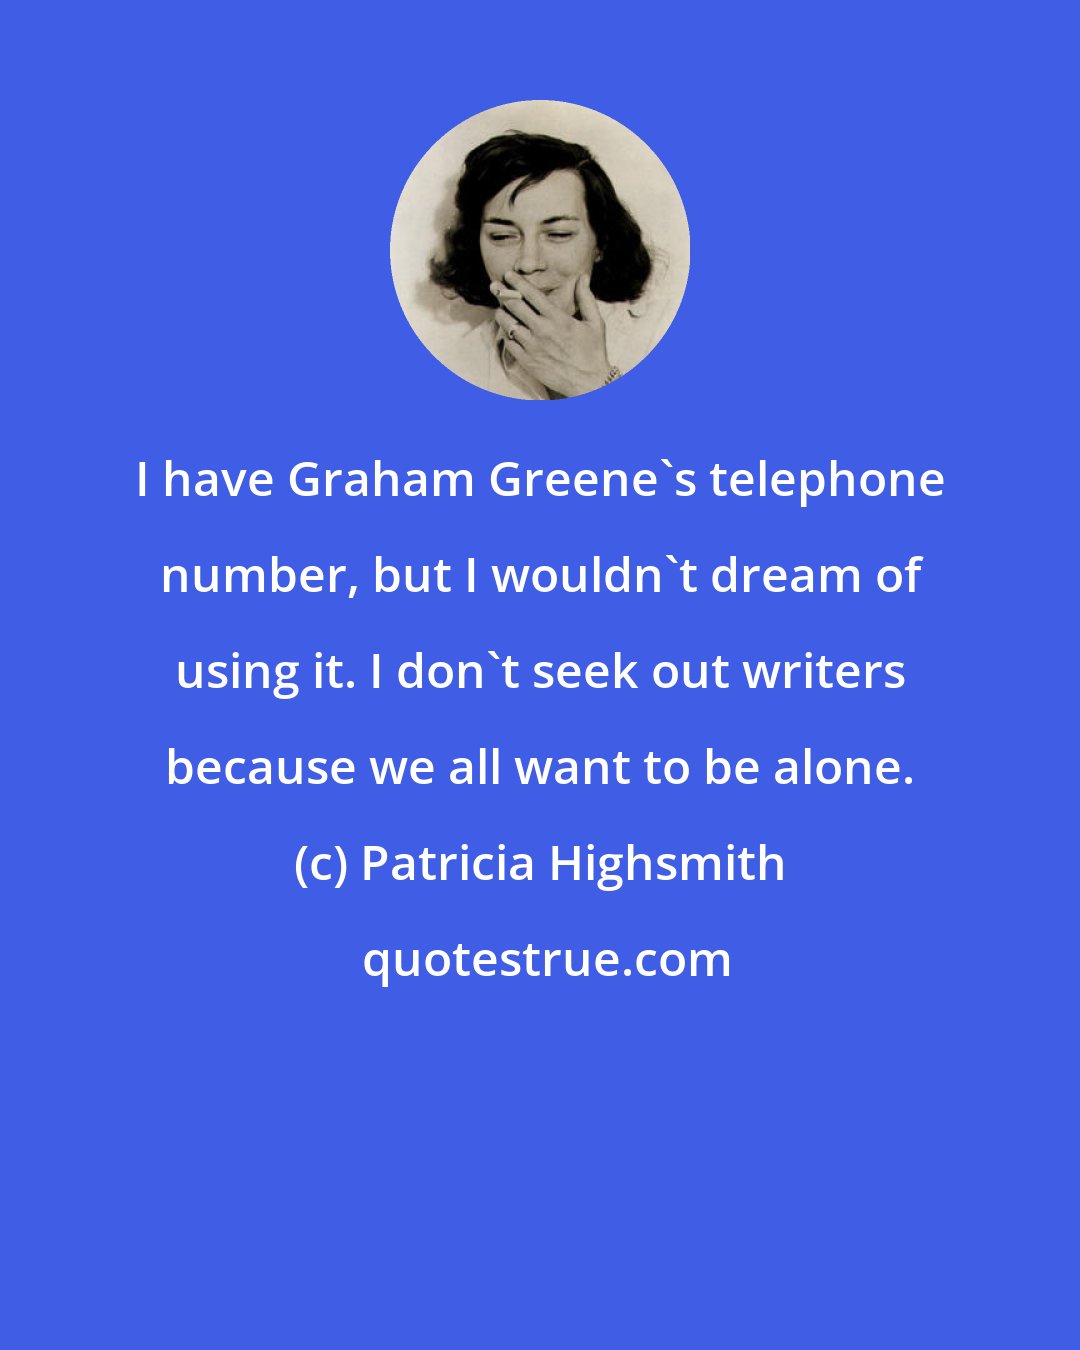 Patricia Highsmith: I have Graham Greene's telephone number, but I wouldn't dream of using it. I don't seek out writers because we all want to be alone.